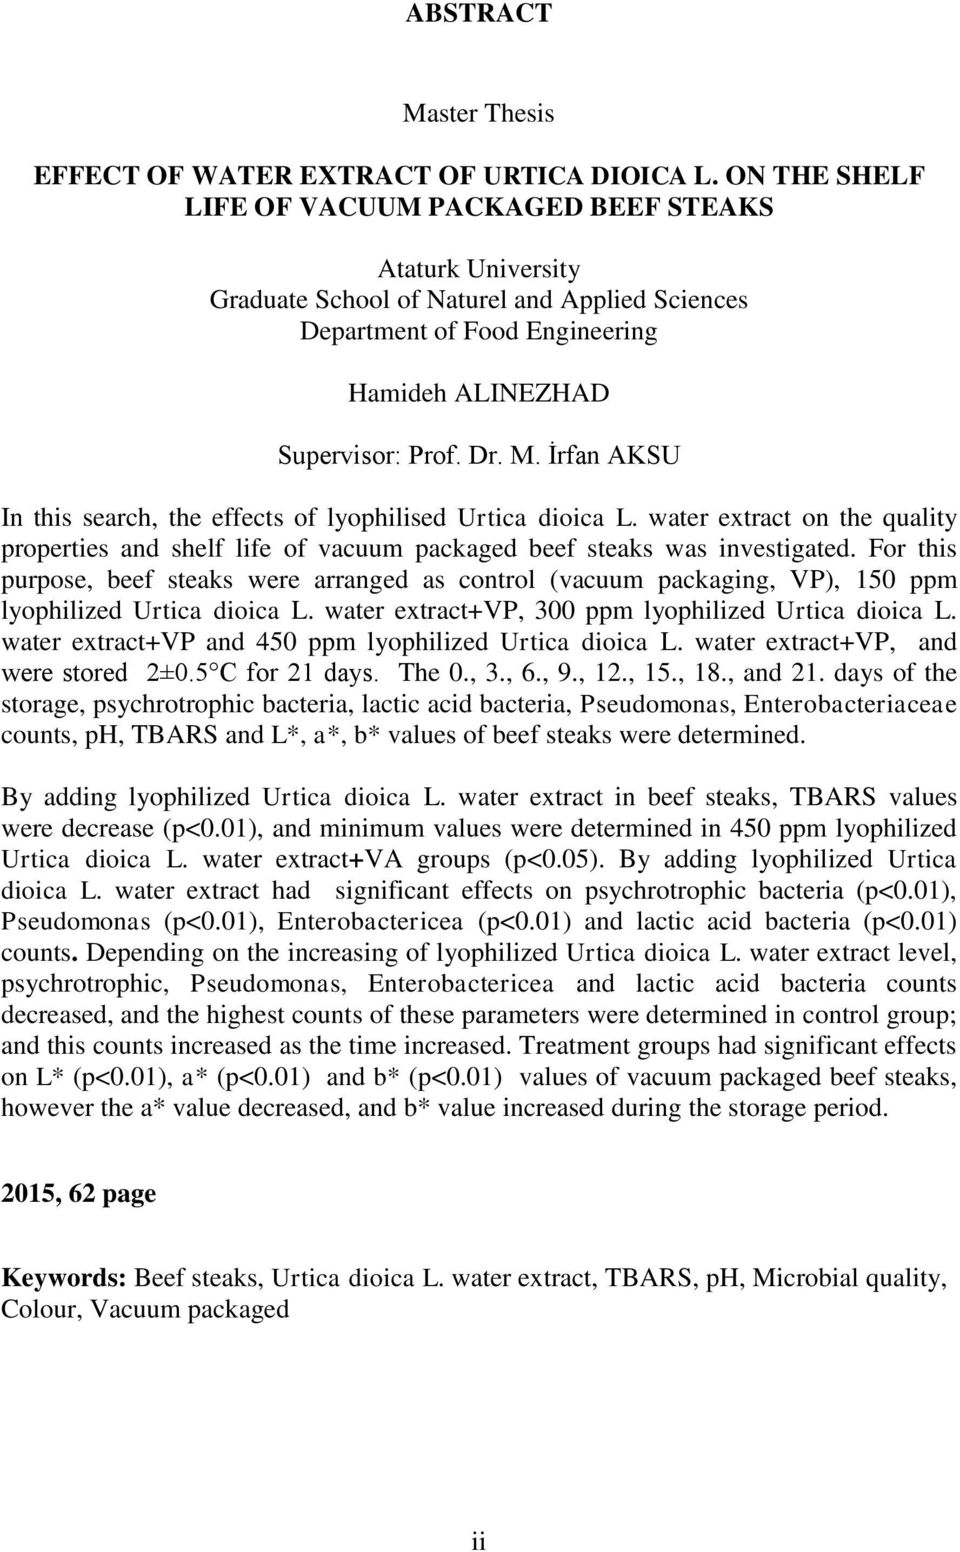 İrfan AKSU In this search, the effects of lyophilised Urtica dioica L. water extract on the quality properties and shelf life of vacuum packaged beef steaks was investigated.